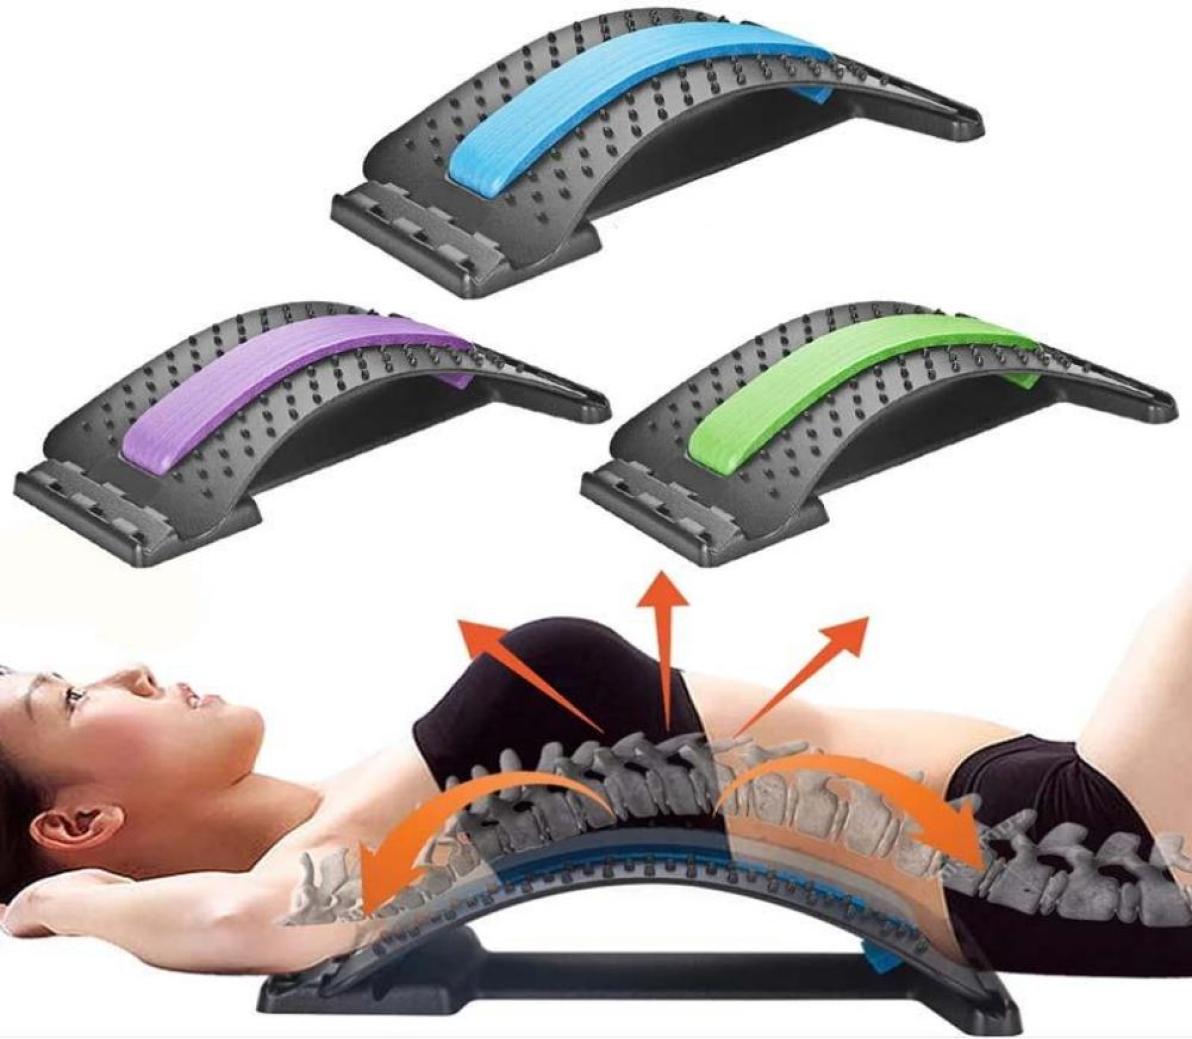 

Accessories Back Massager Stretcher Fitness Stretch Equipment Lumbar Support Relaxation Mate Spinal Pain Relieve Chiropractor Mess5418201